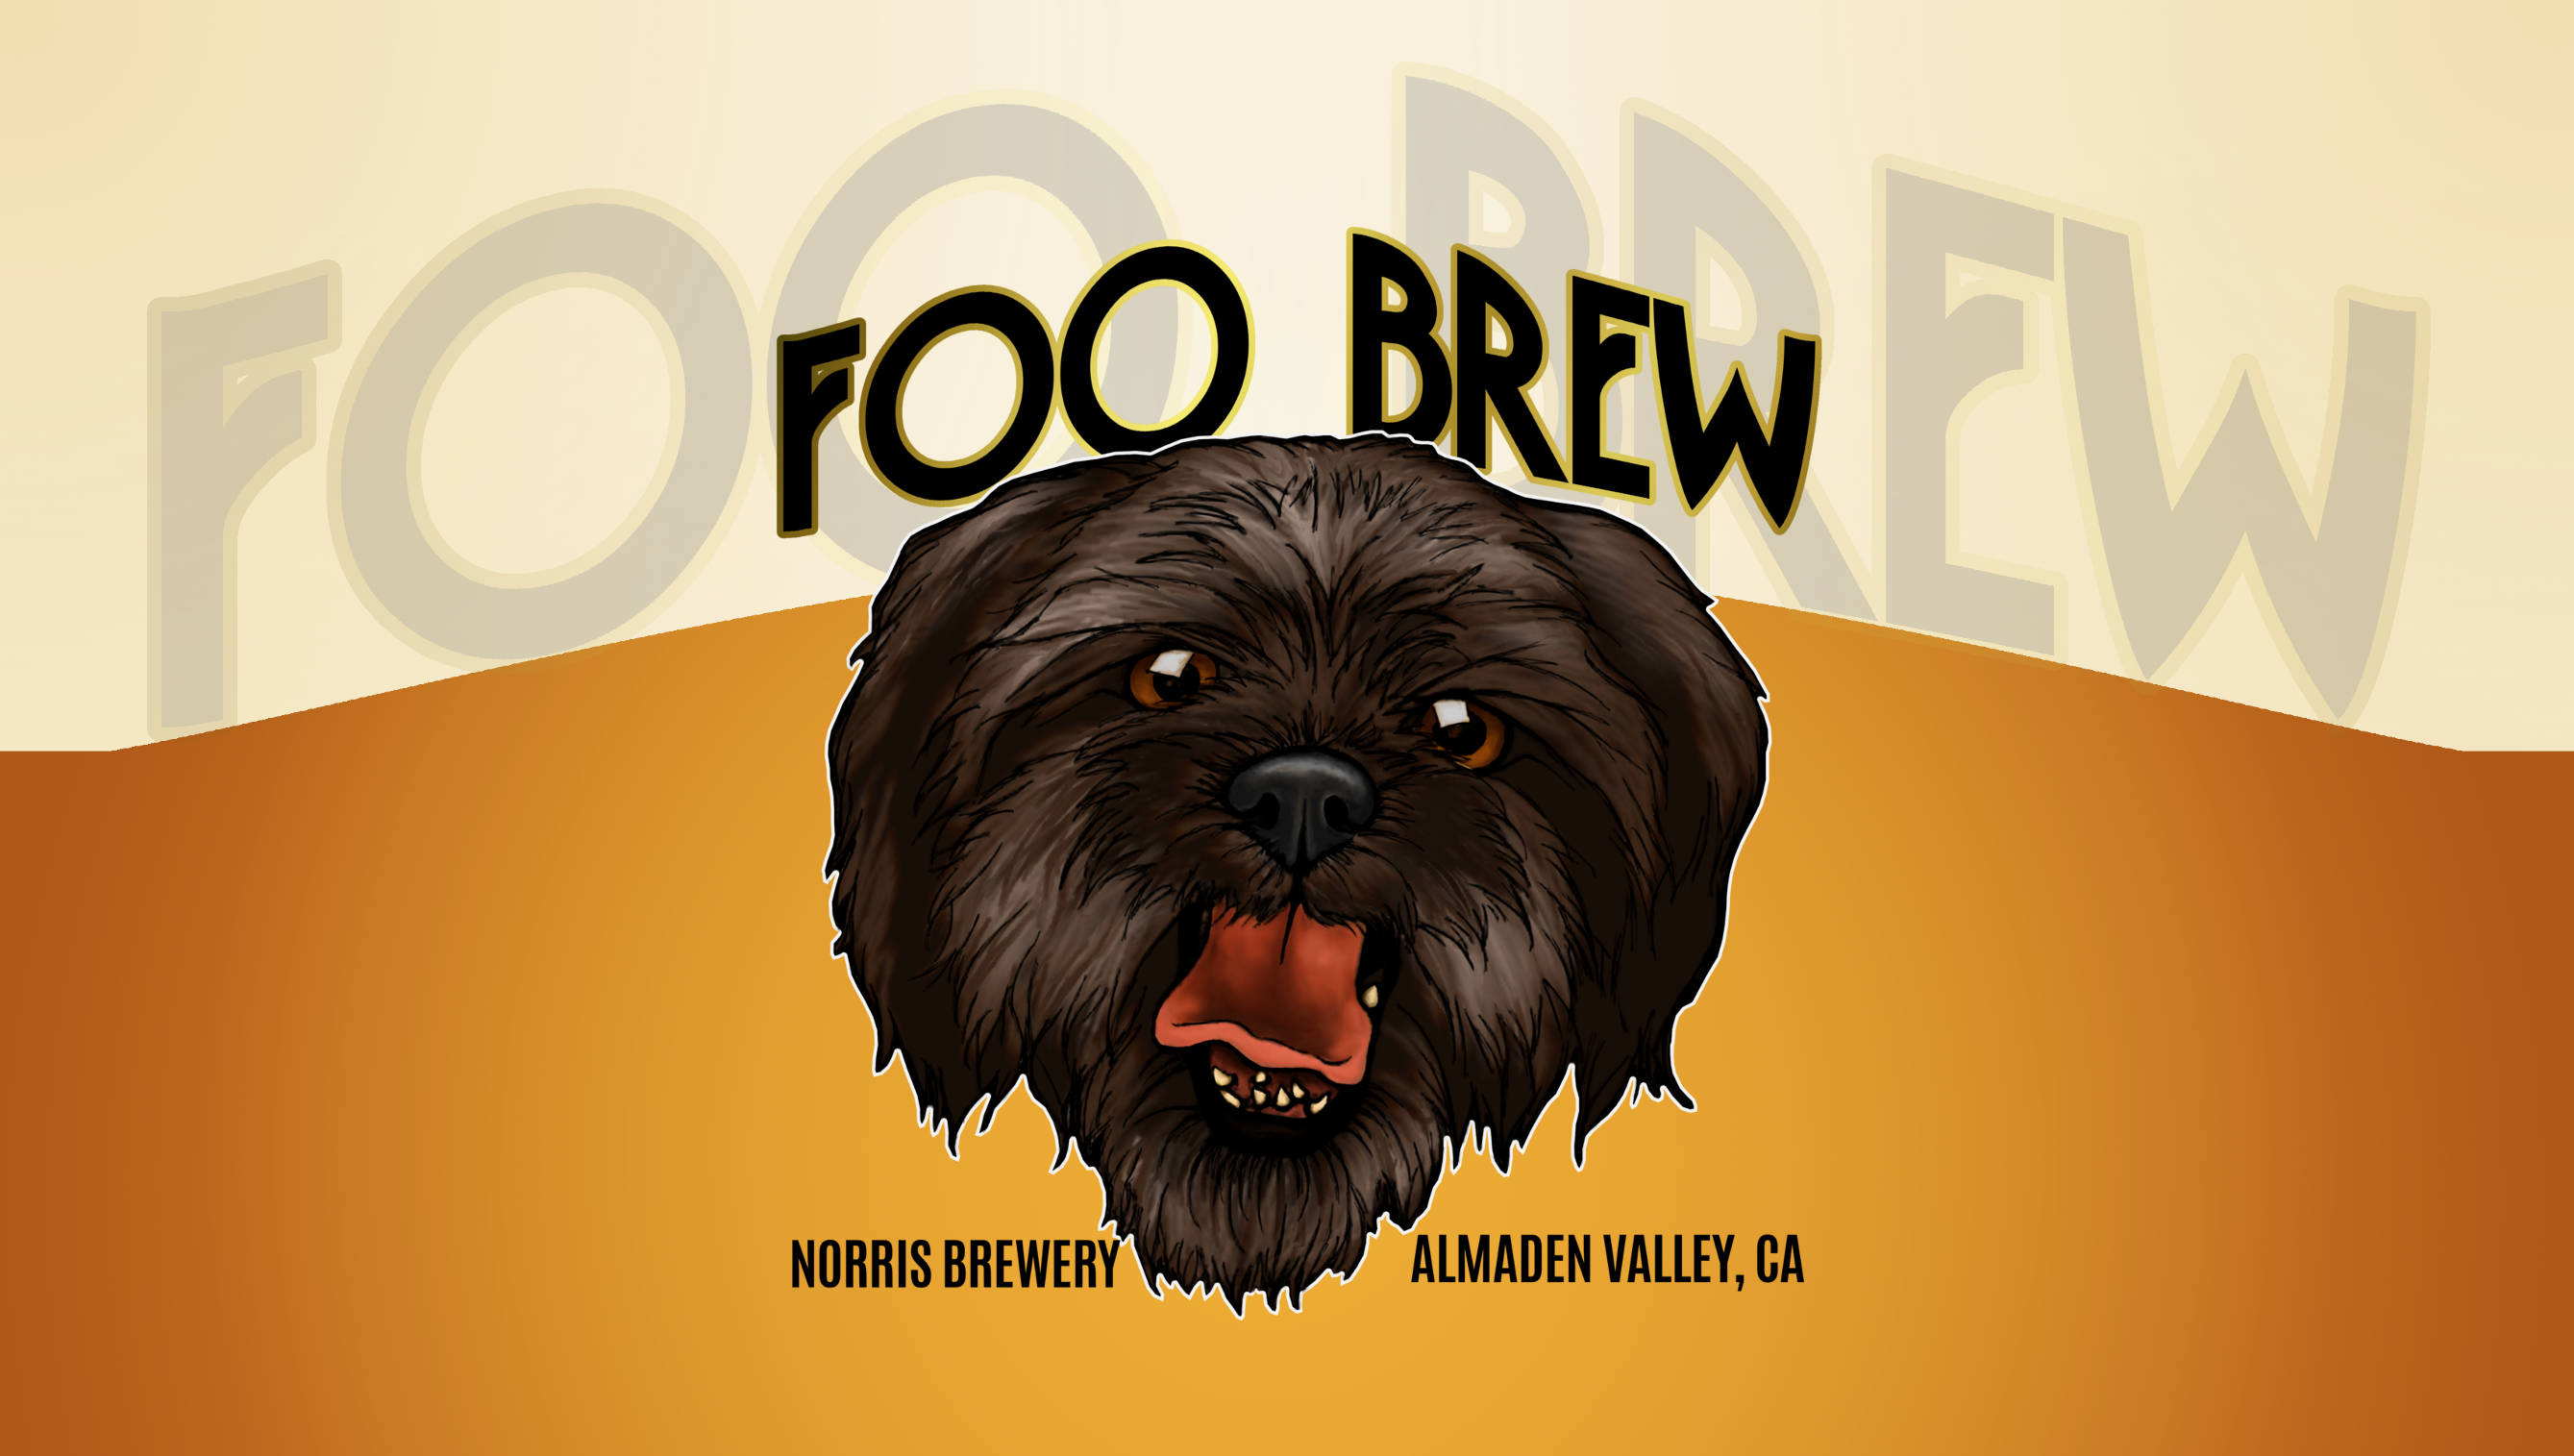 Check out FooBrew!